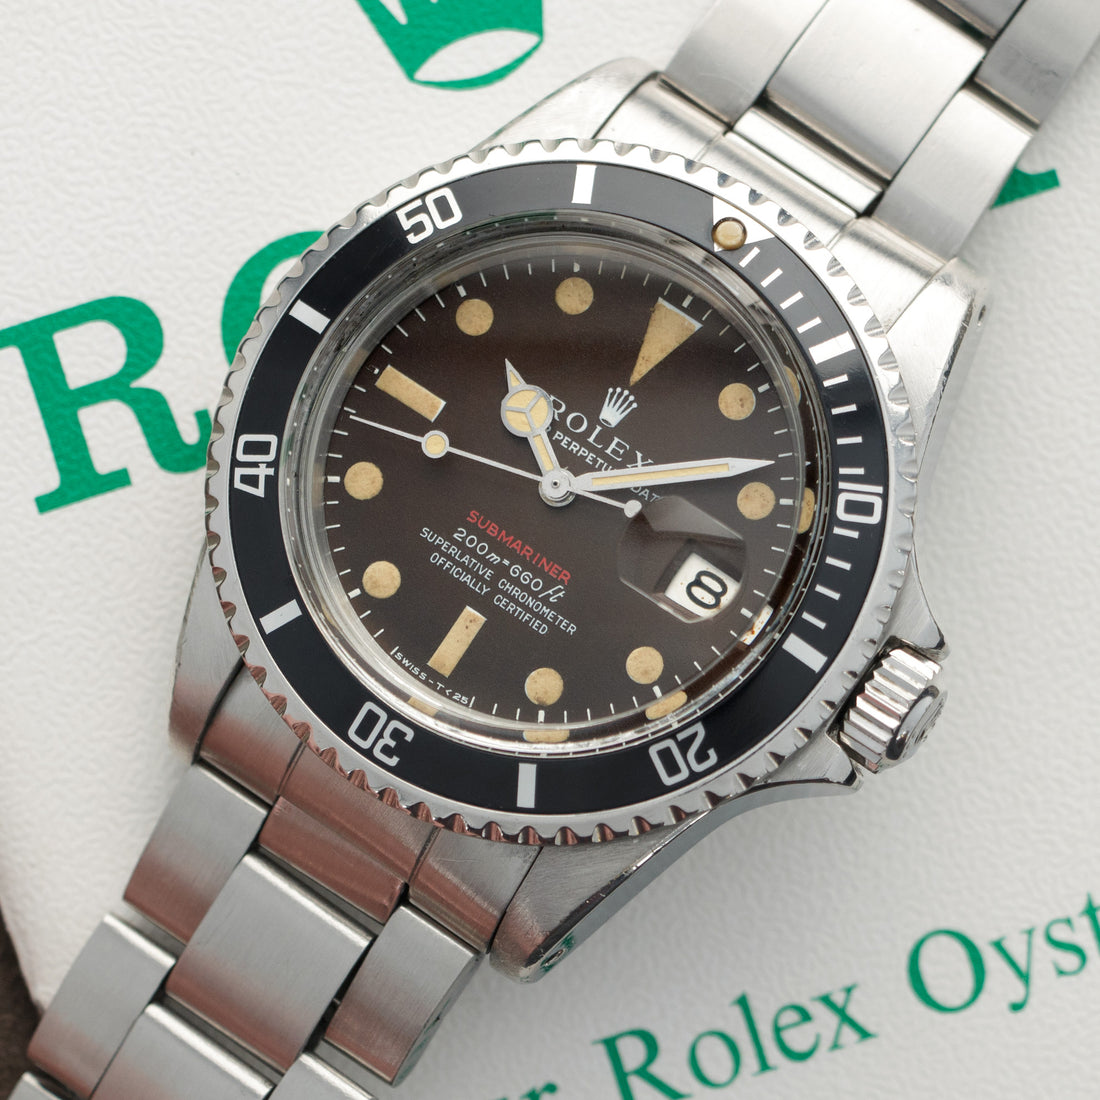 Rolex Red Submariner Tropical Brown Watch Ref. 1680, with Original Box and Papers